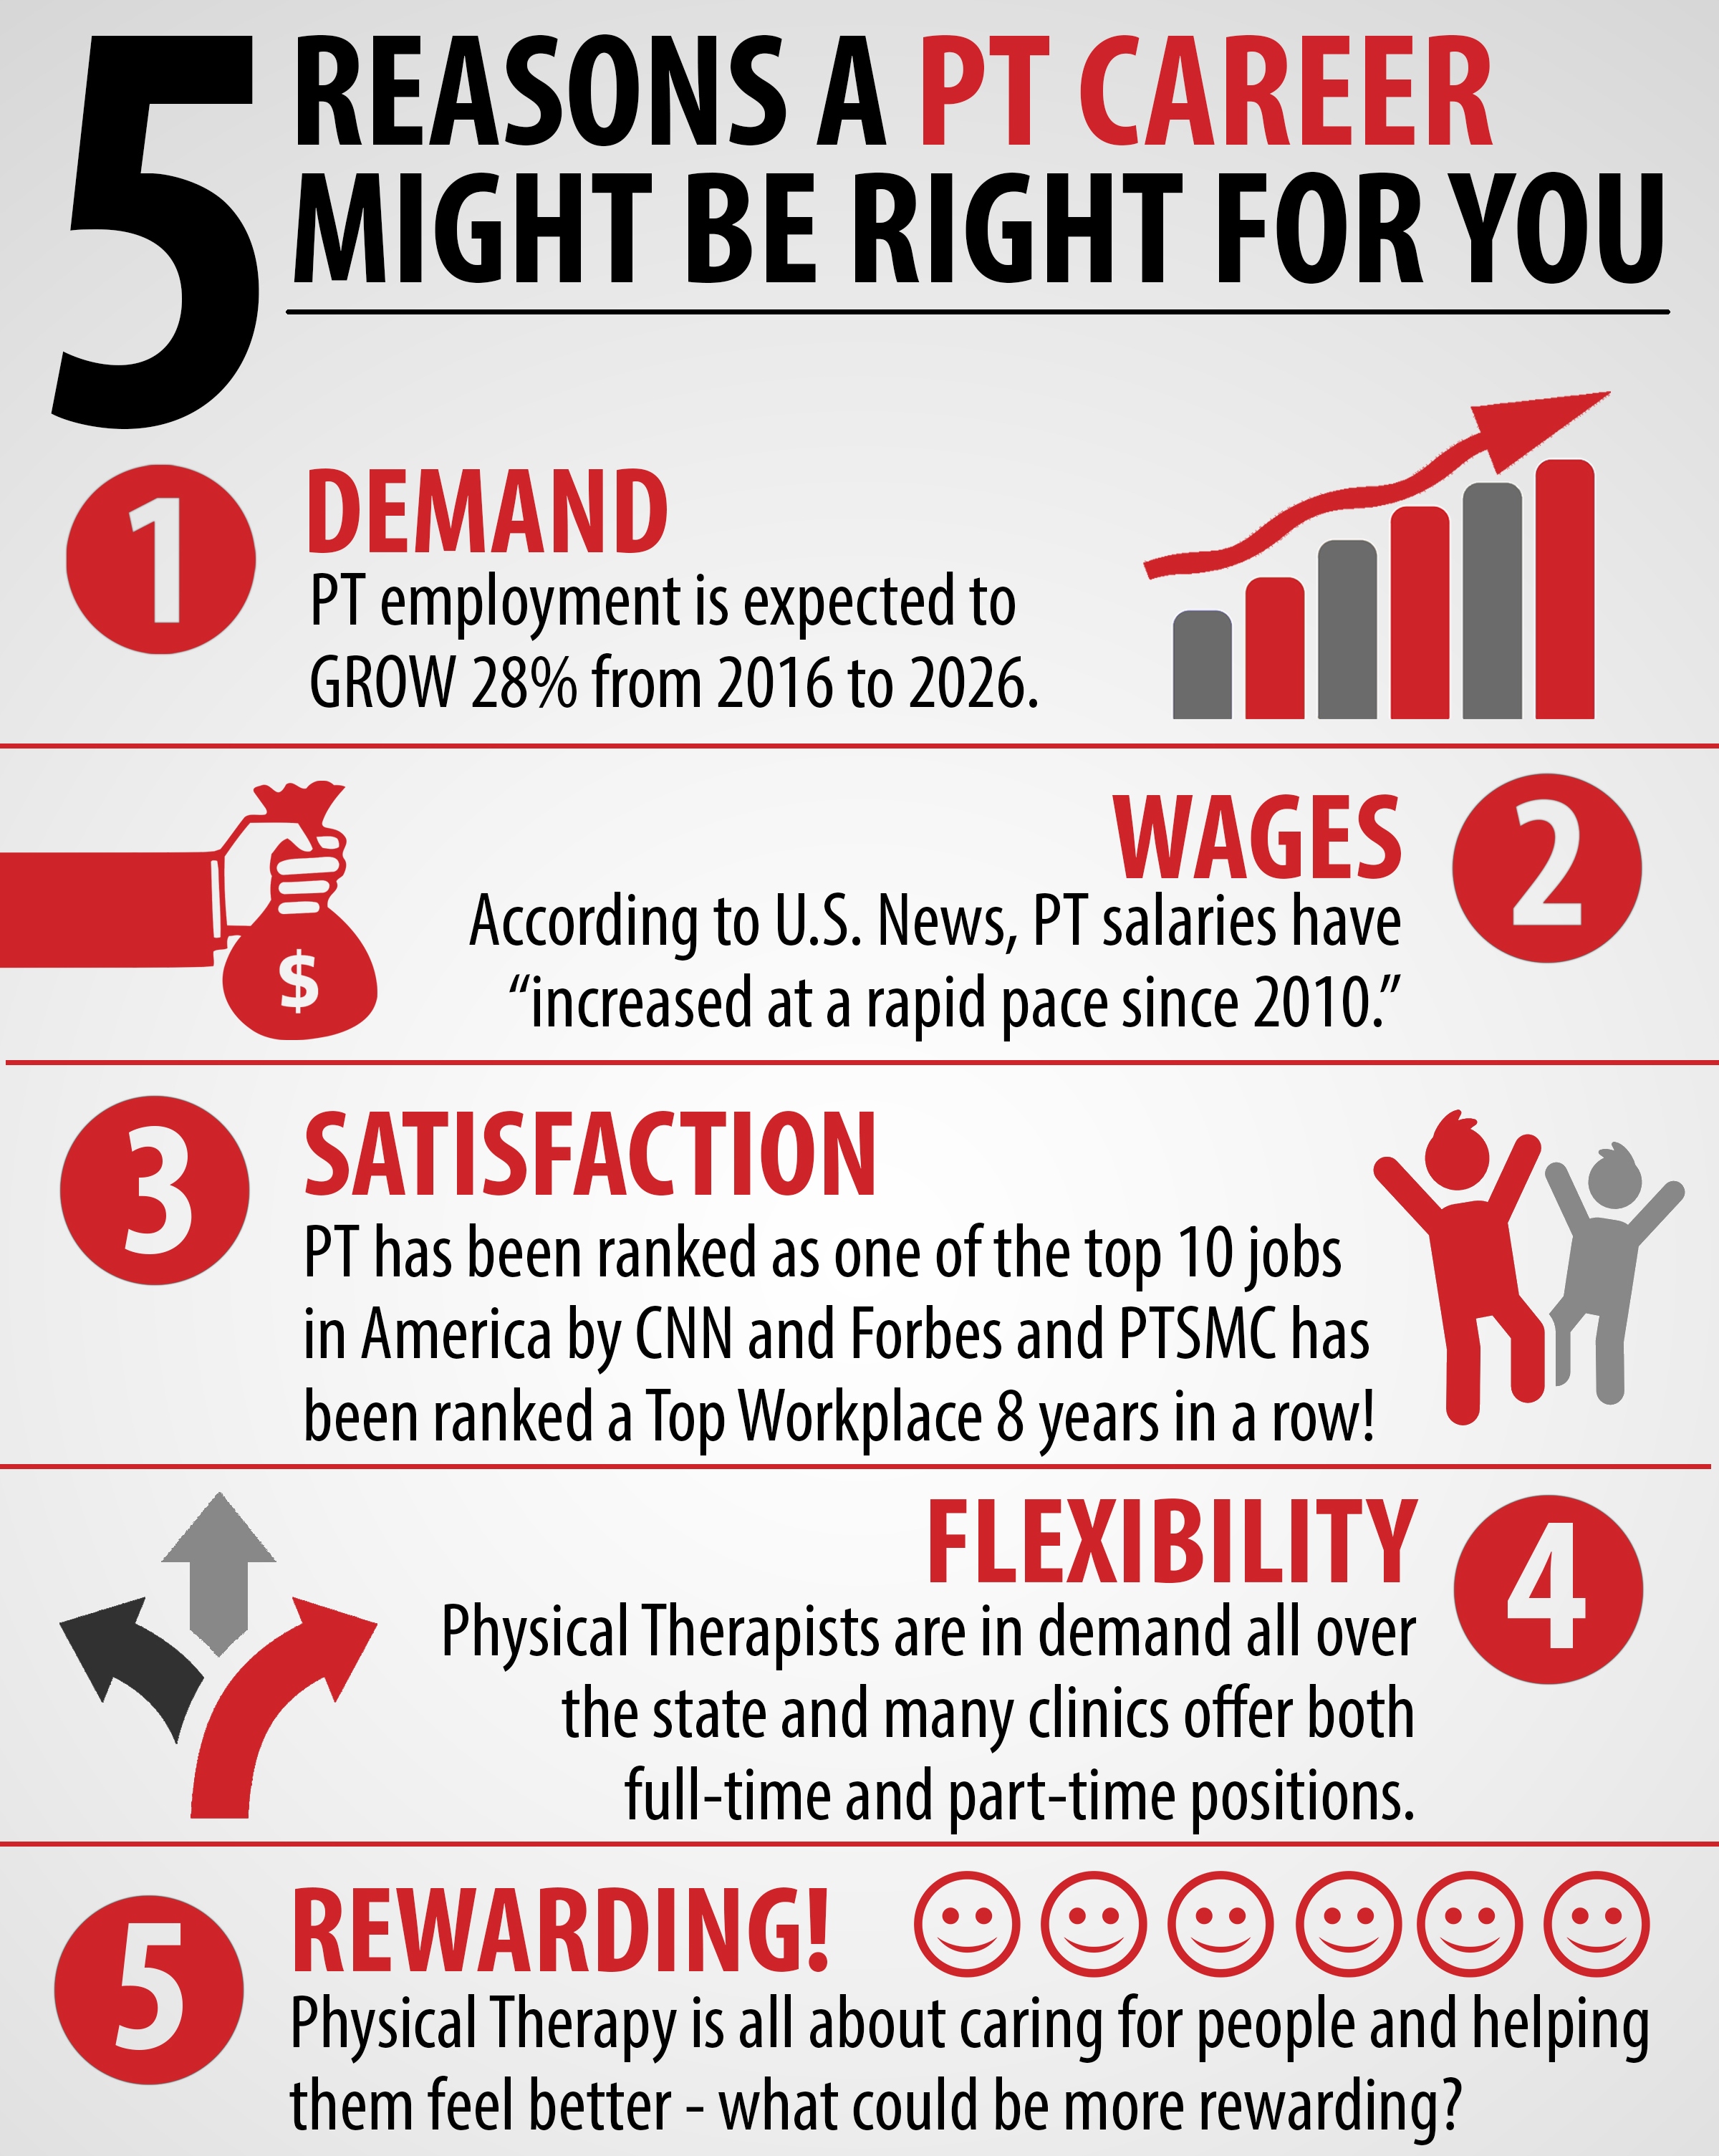 5 Reasons to Pursue a Career in PT